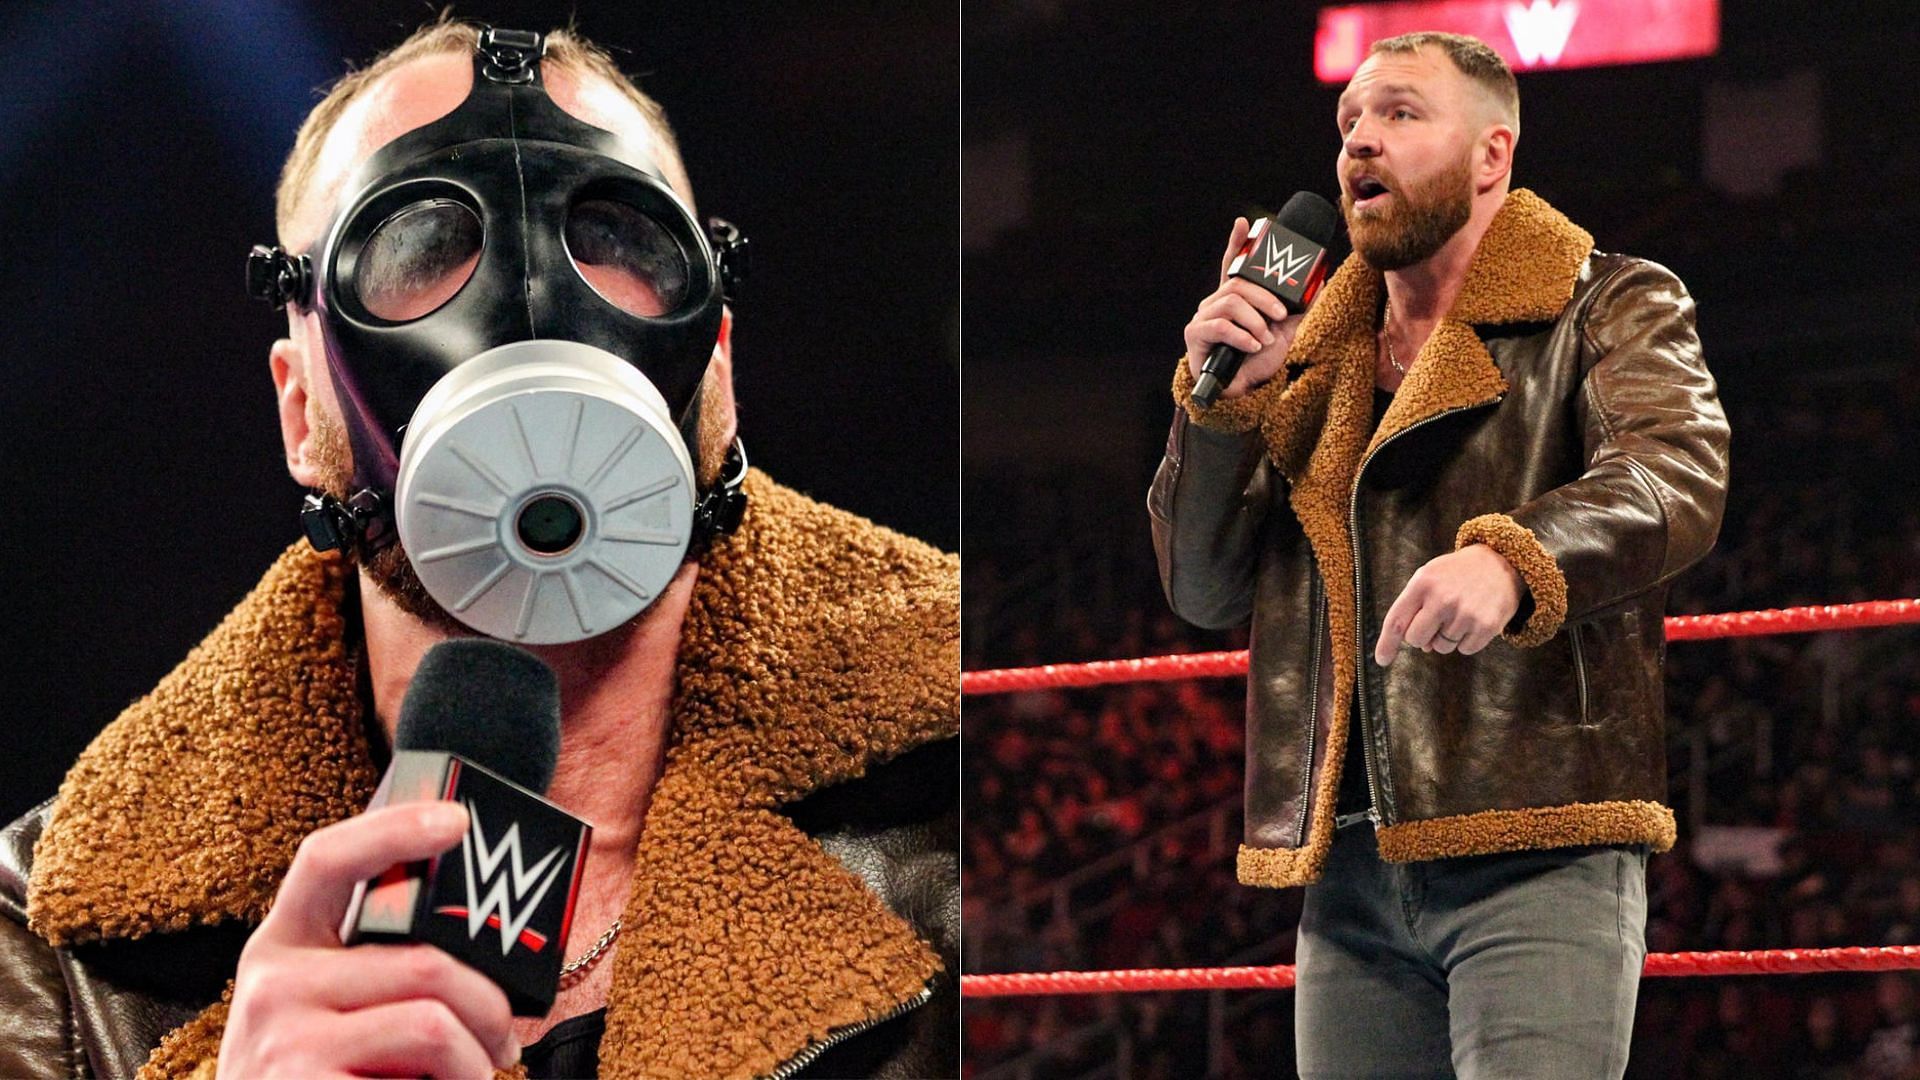 Jon Moxley performed as Dean Ambrose in WWE between 2011 and 2019.